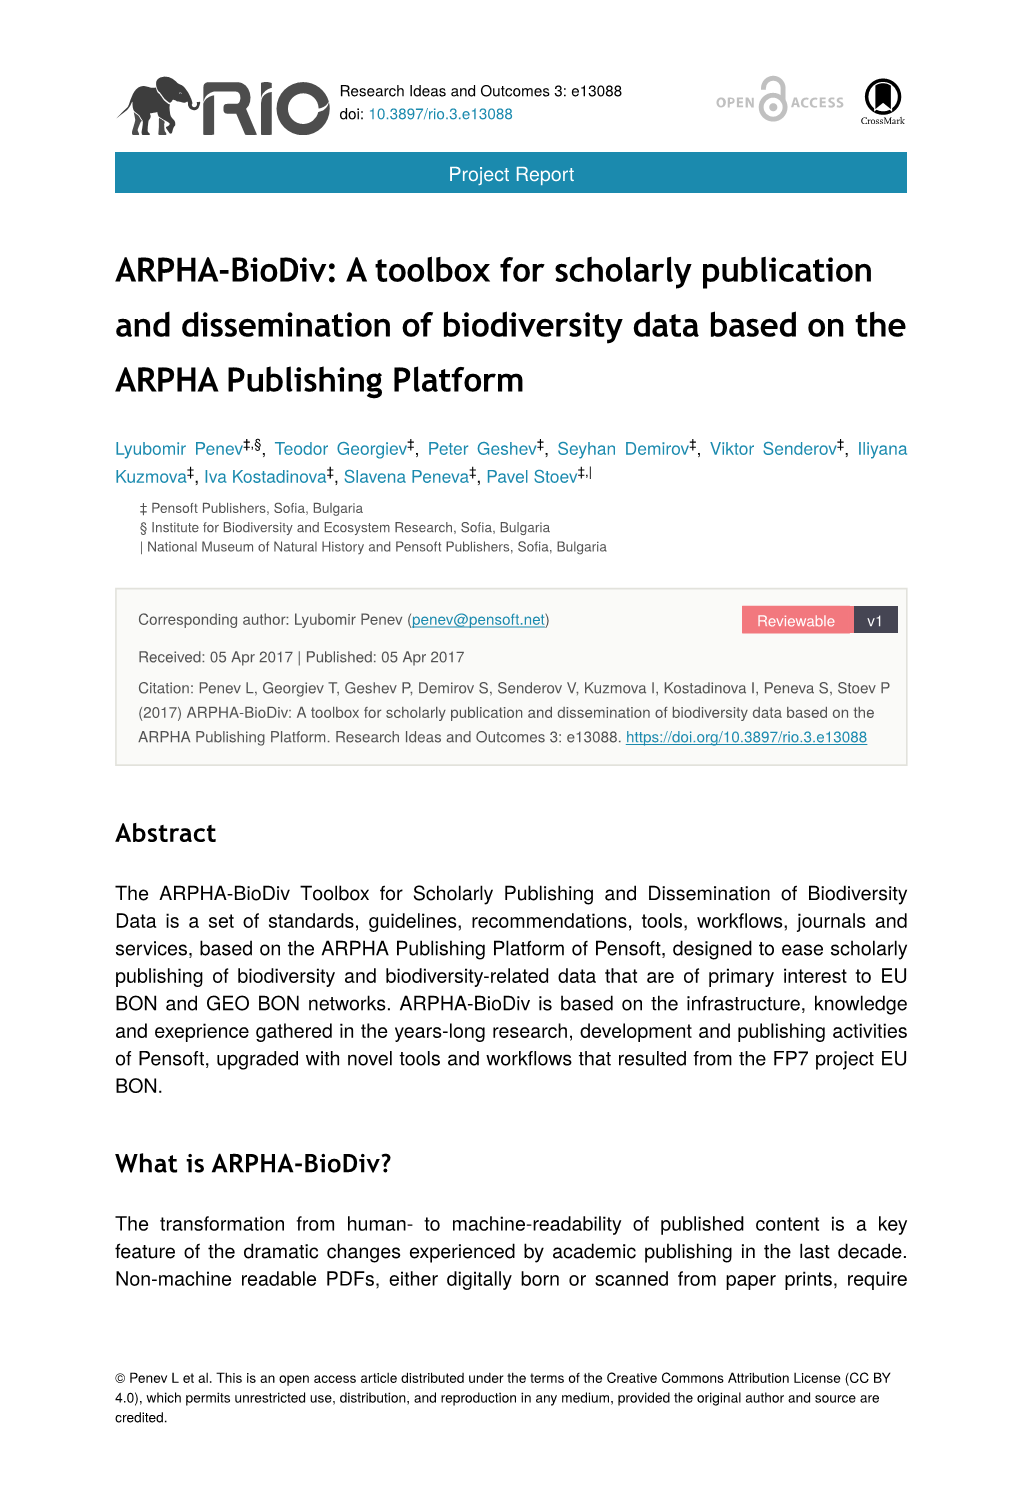 ARPHA-Biodiv: a Toolbox for Scholarly Publication and Dissemination of Biodiversity Data Based on the ARPHA Publishing Platform